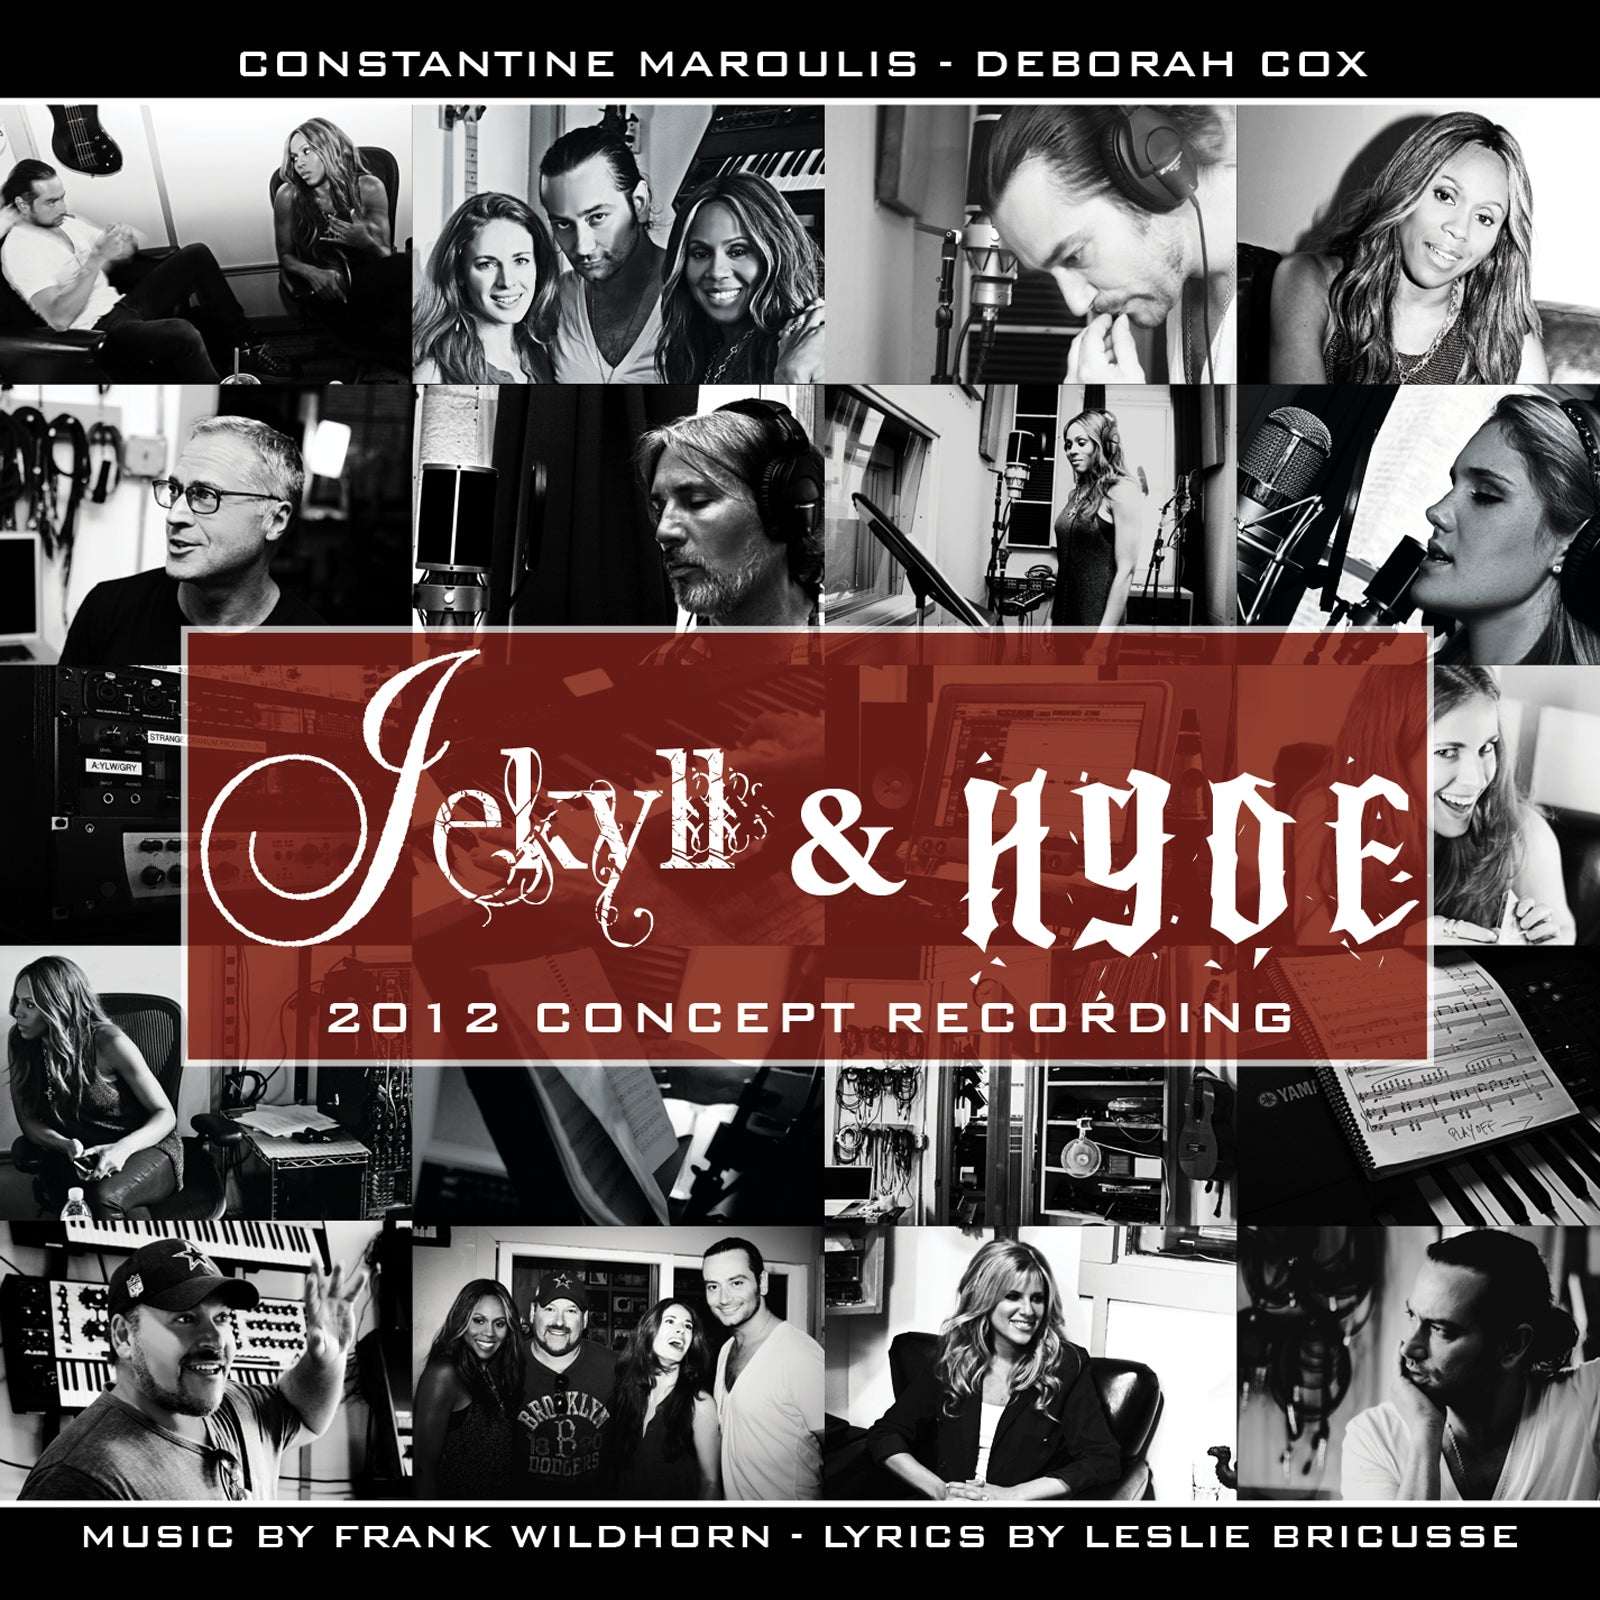 Jekyll & Hyde (2012 Concept Recording) [CD]